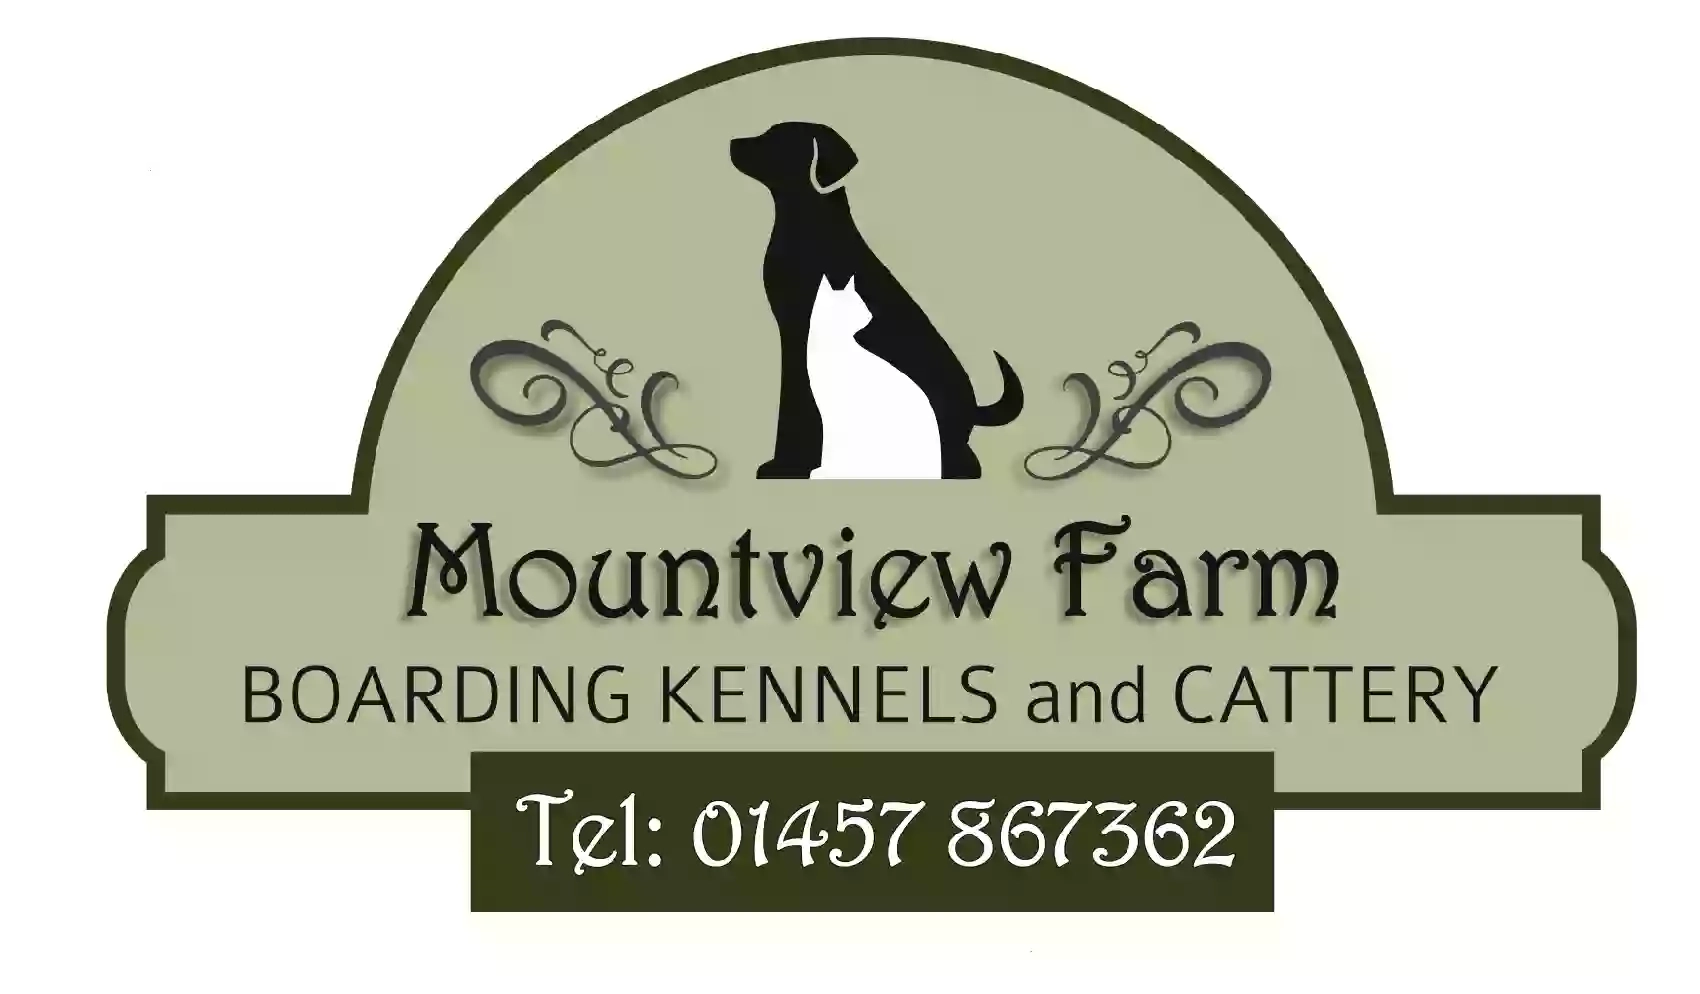 Mount View Farm Kennels and Cattery